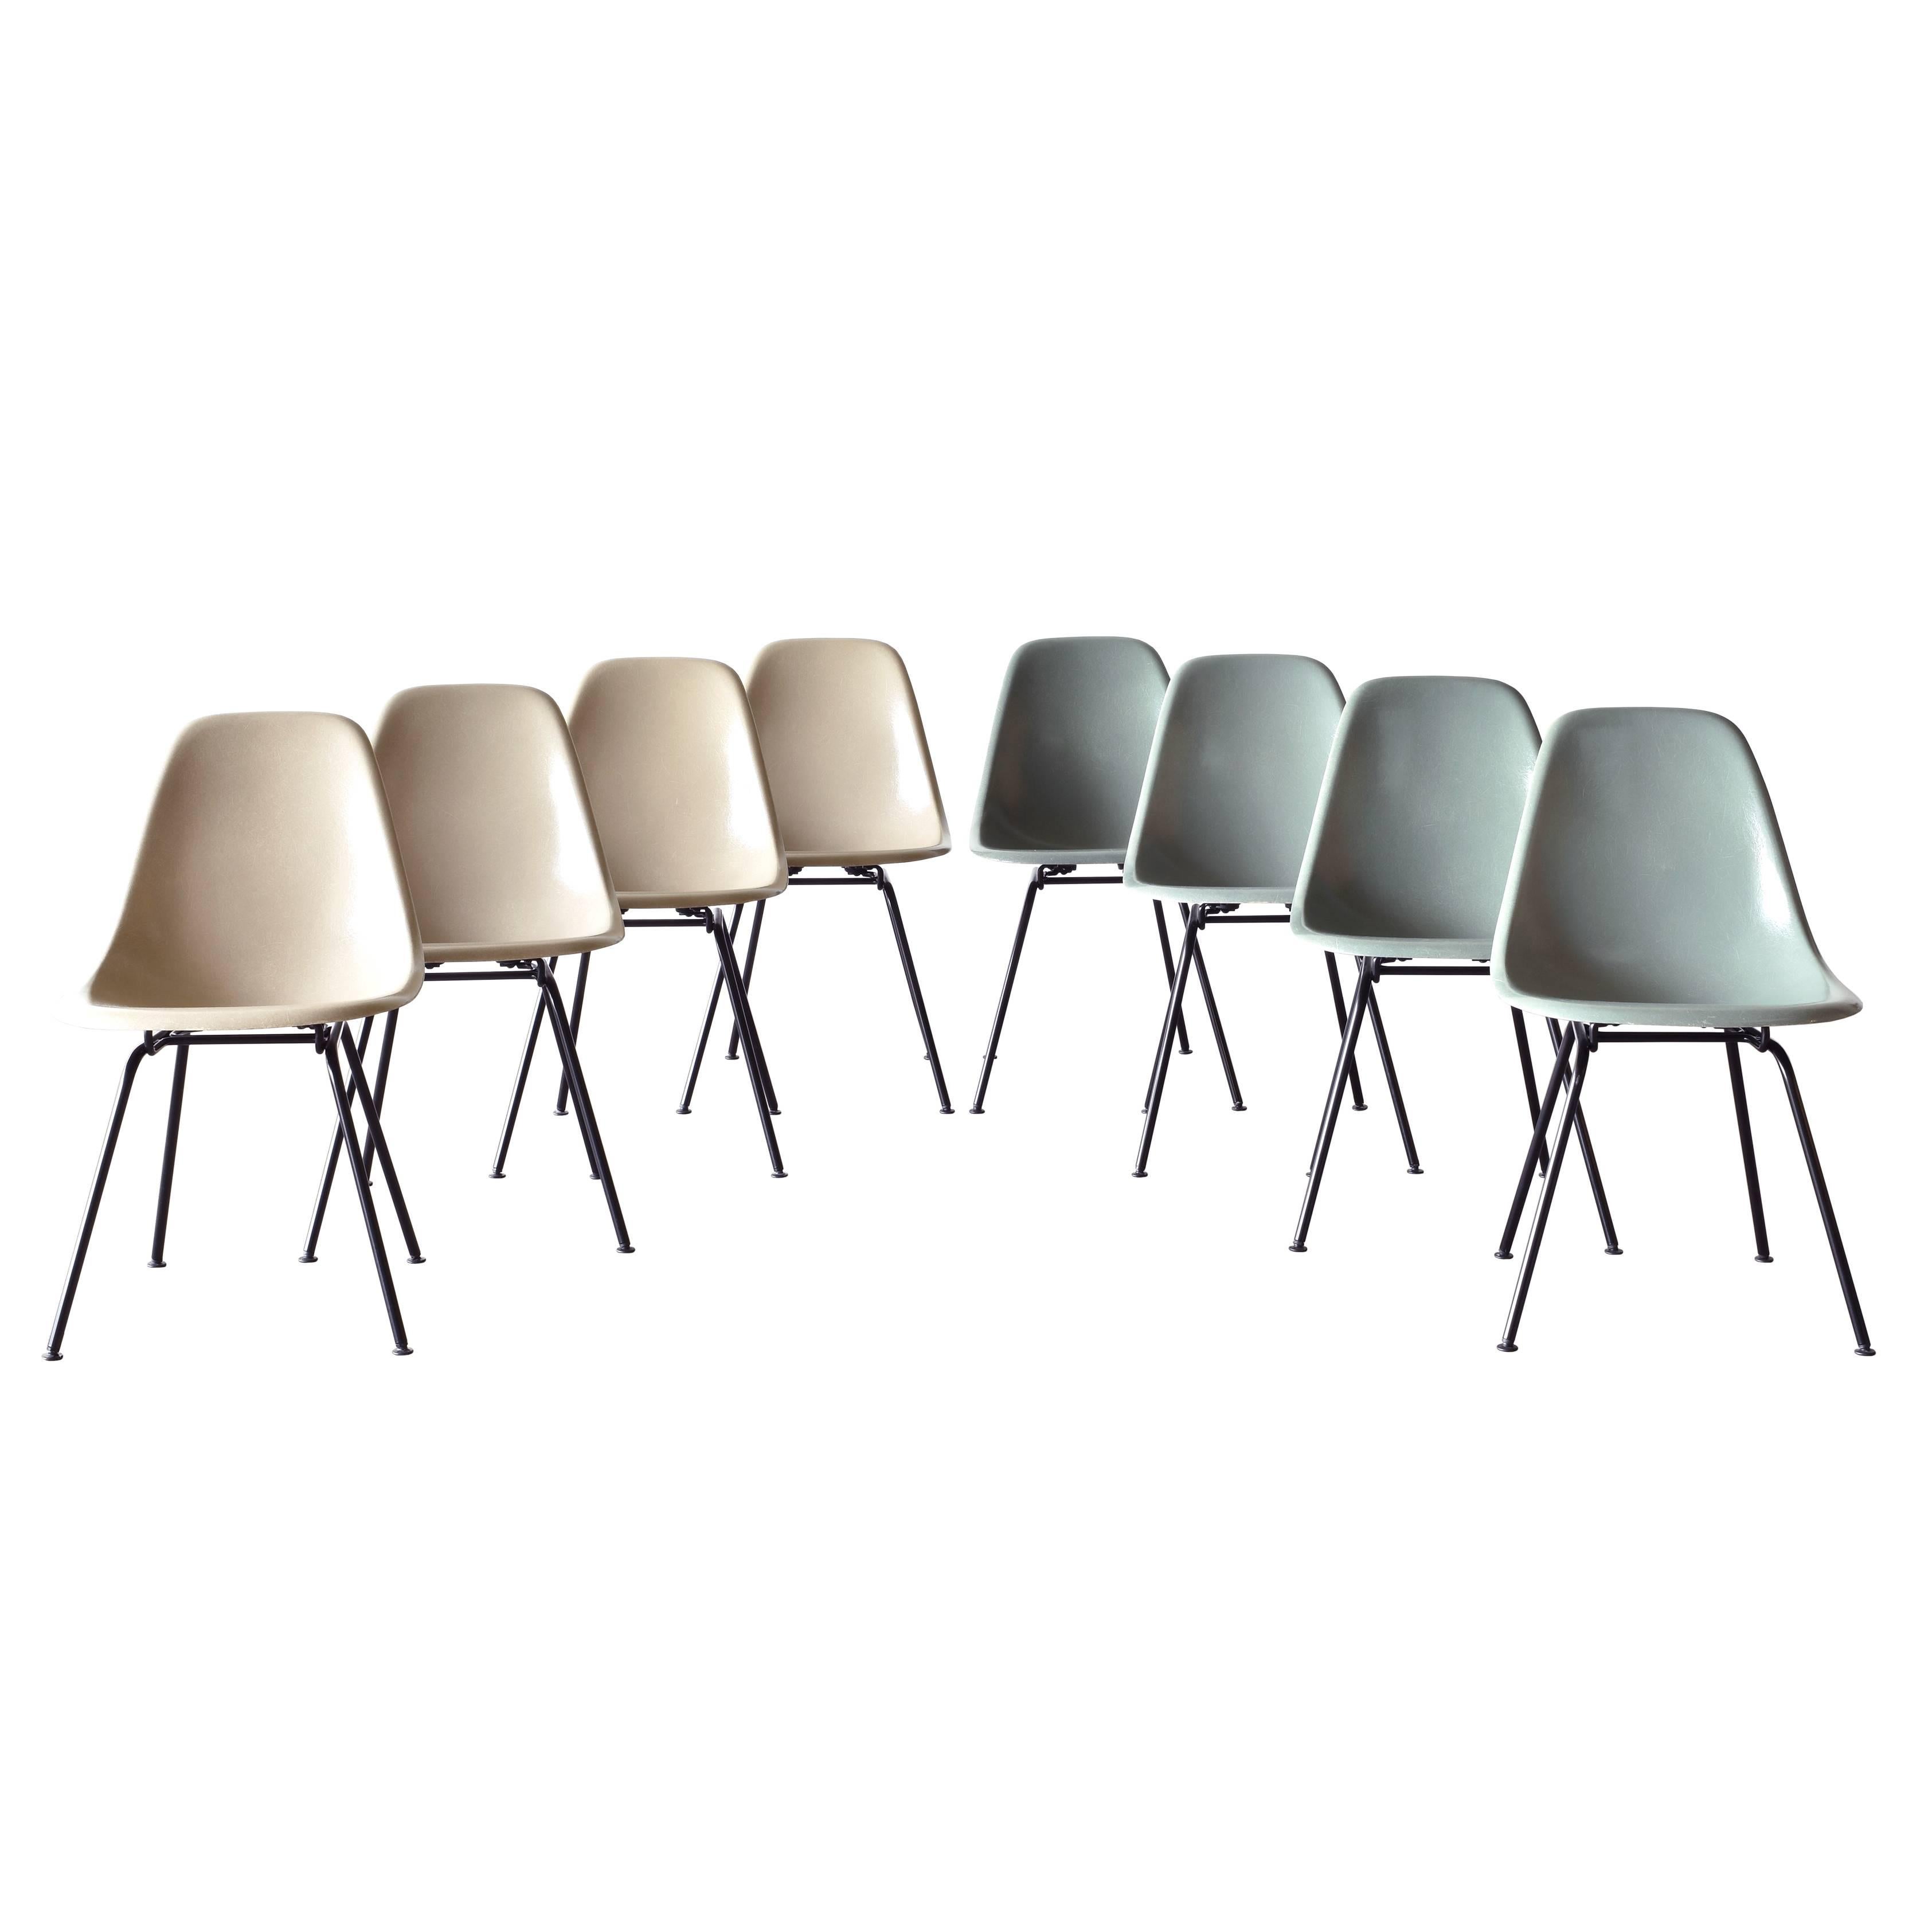 Set of Eight Eames DSX Herman Miller Dining Chairs Sea Foam Green and Greige